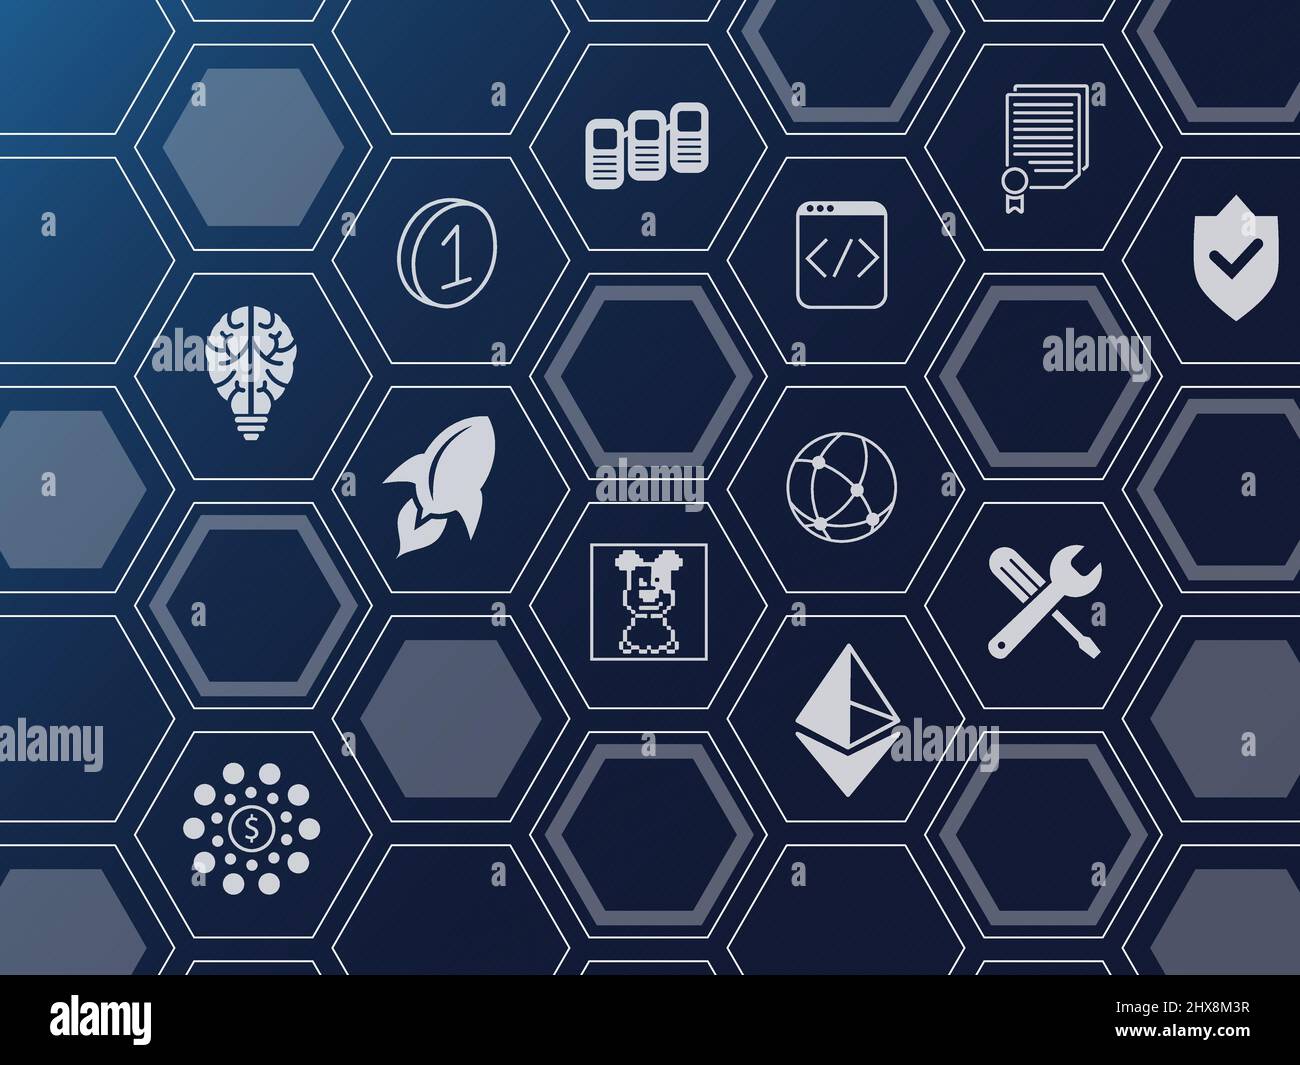 NFT Non-Fungible Token background. Blue dark wallpaper with hexagonal shapes and icons. Stock Vector